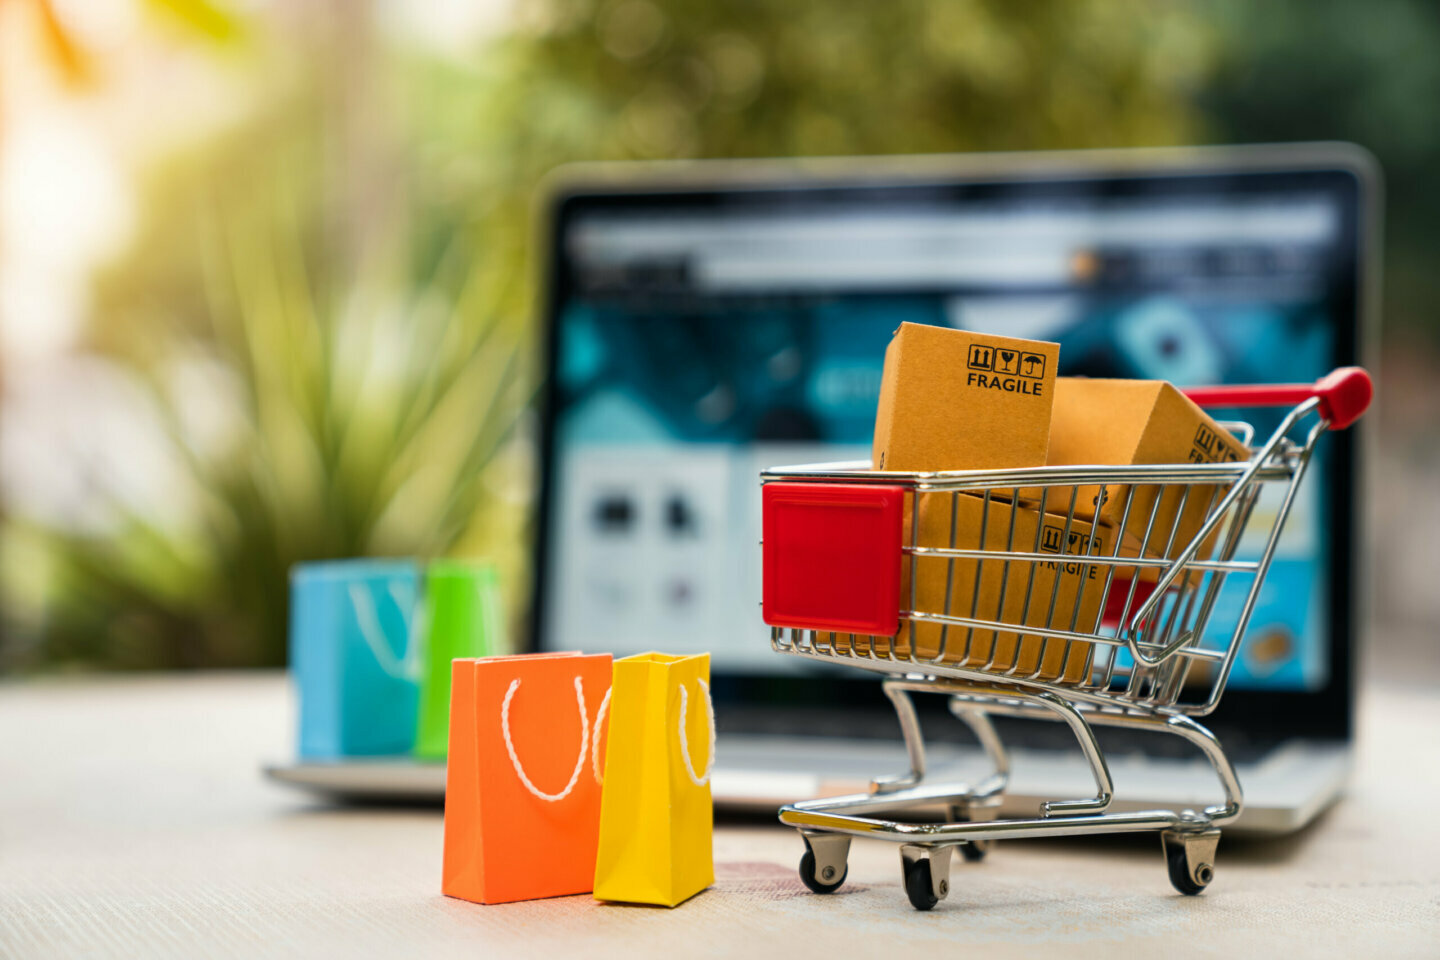 Digital commerce: what 7 trends are shaping retail in SEA? – Tech Wire Asia